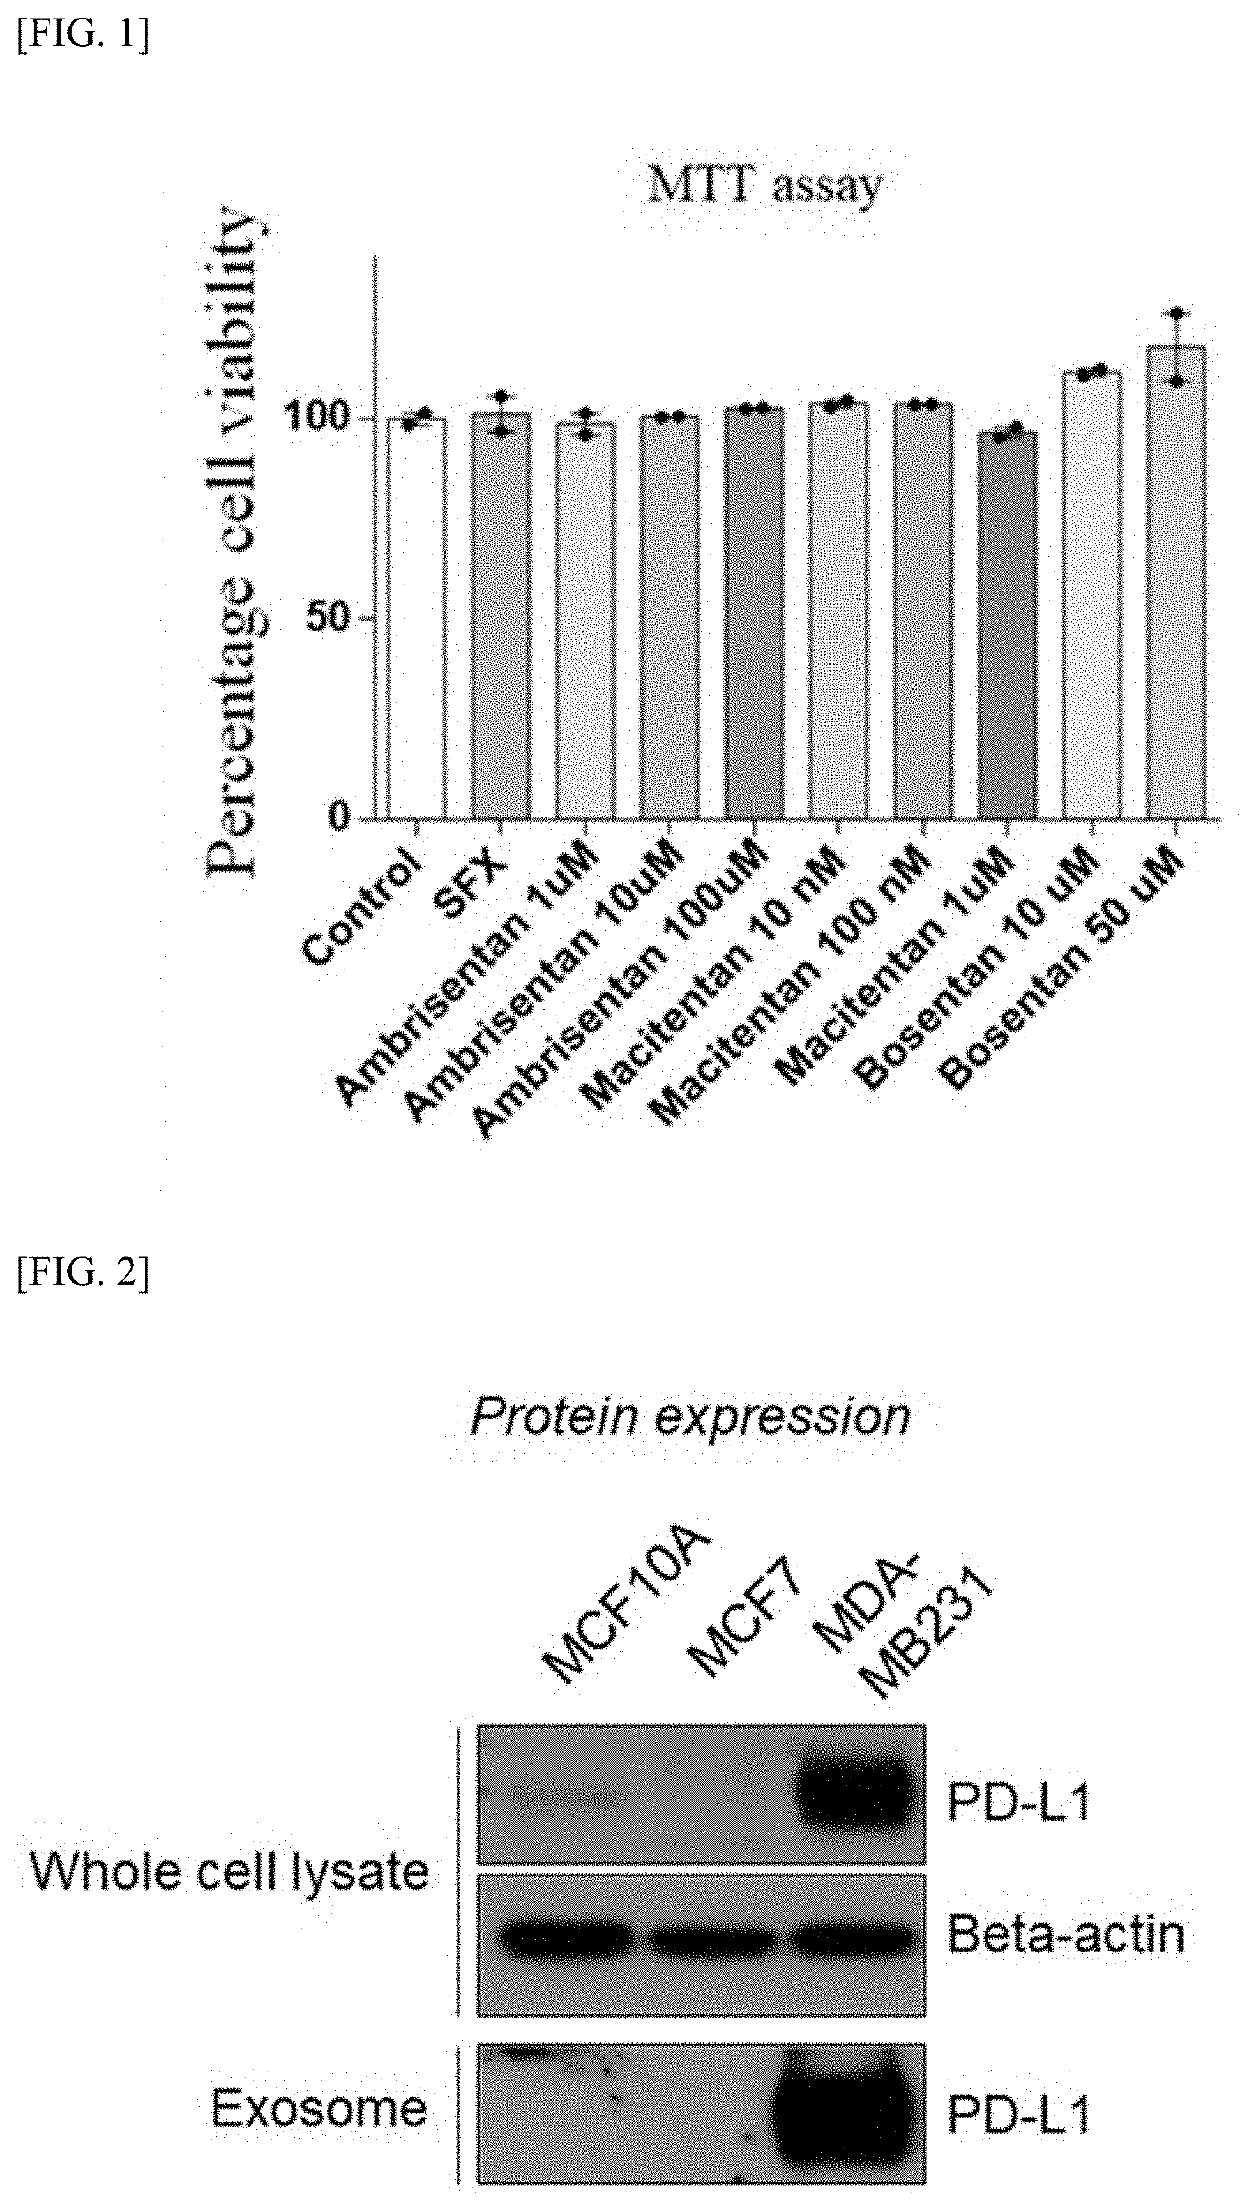 Use of endothelin receptor inhibitor for inhibiting exosome secretion or inhibiting pd-l1 expression